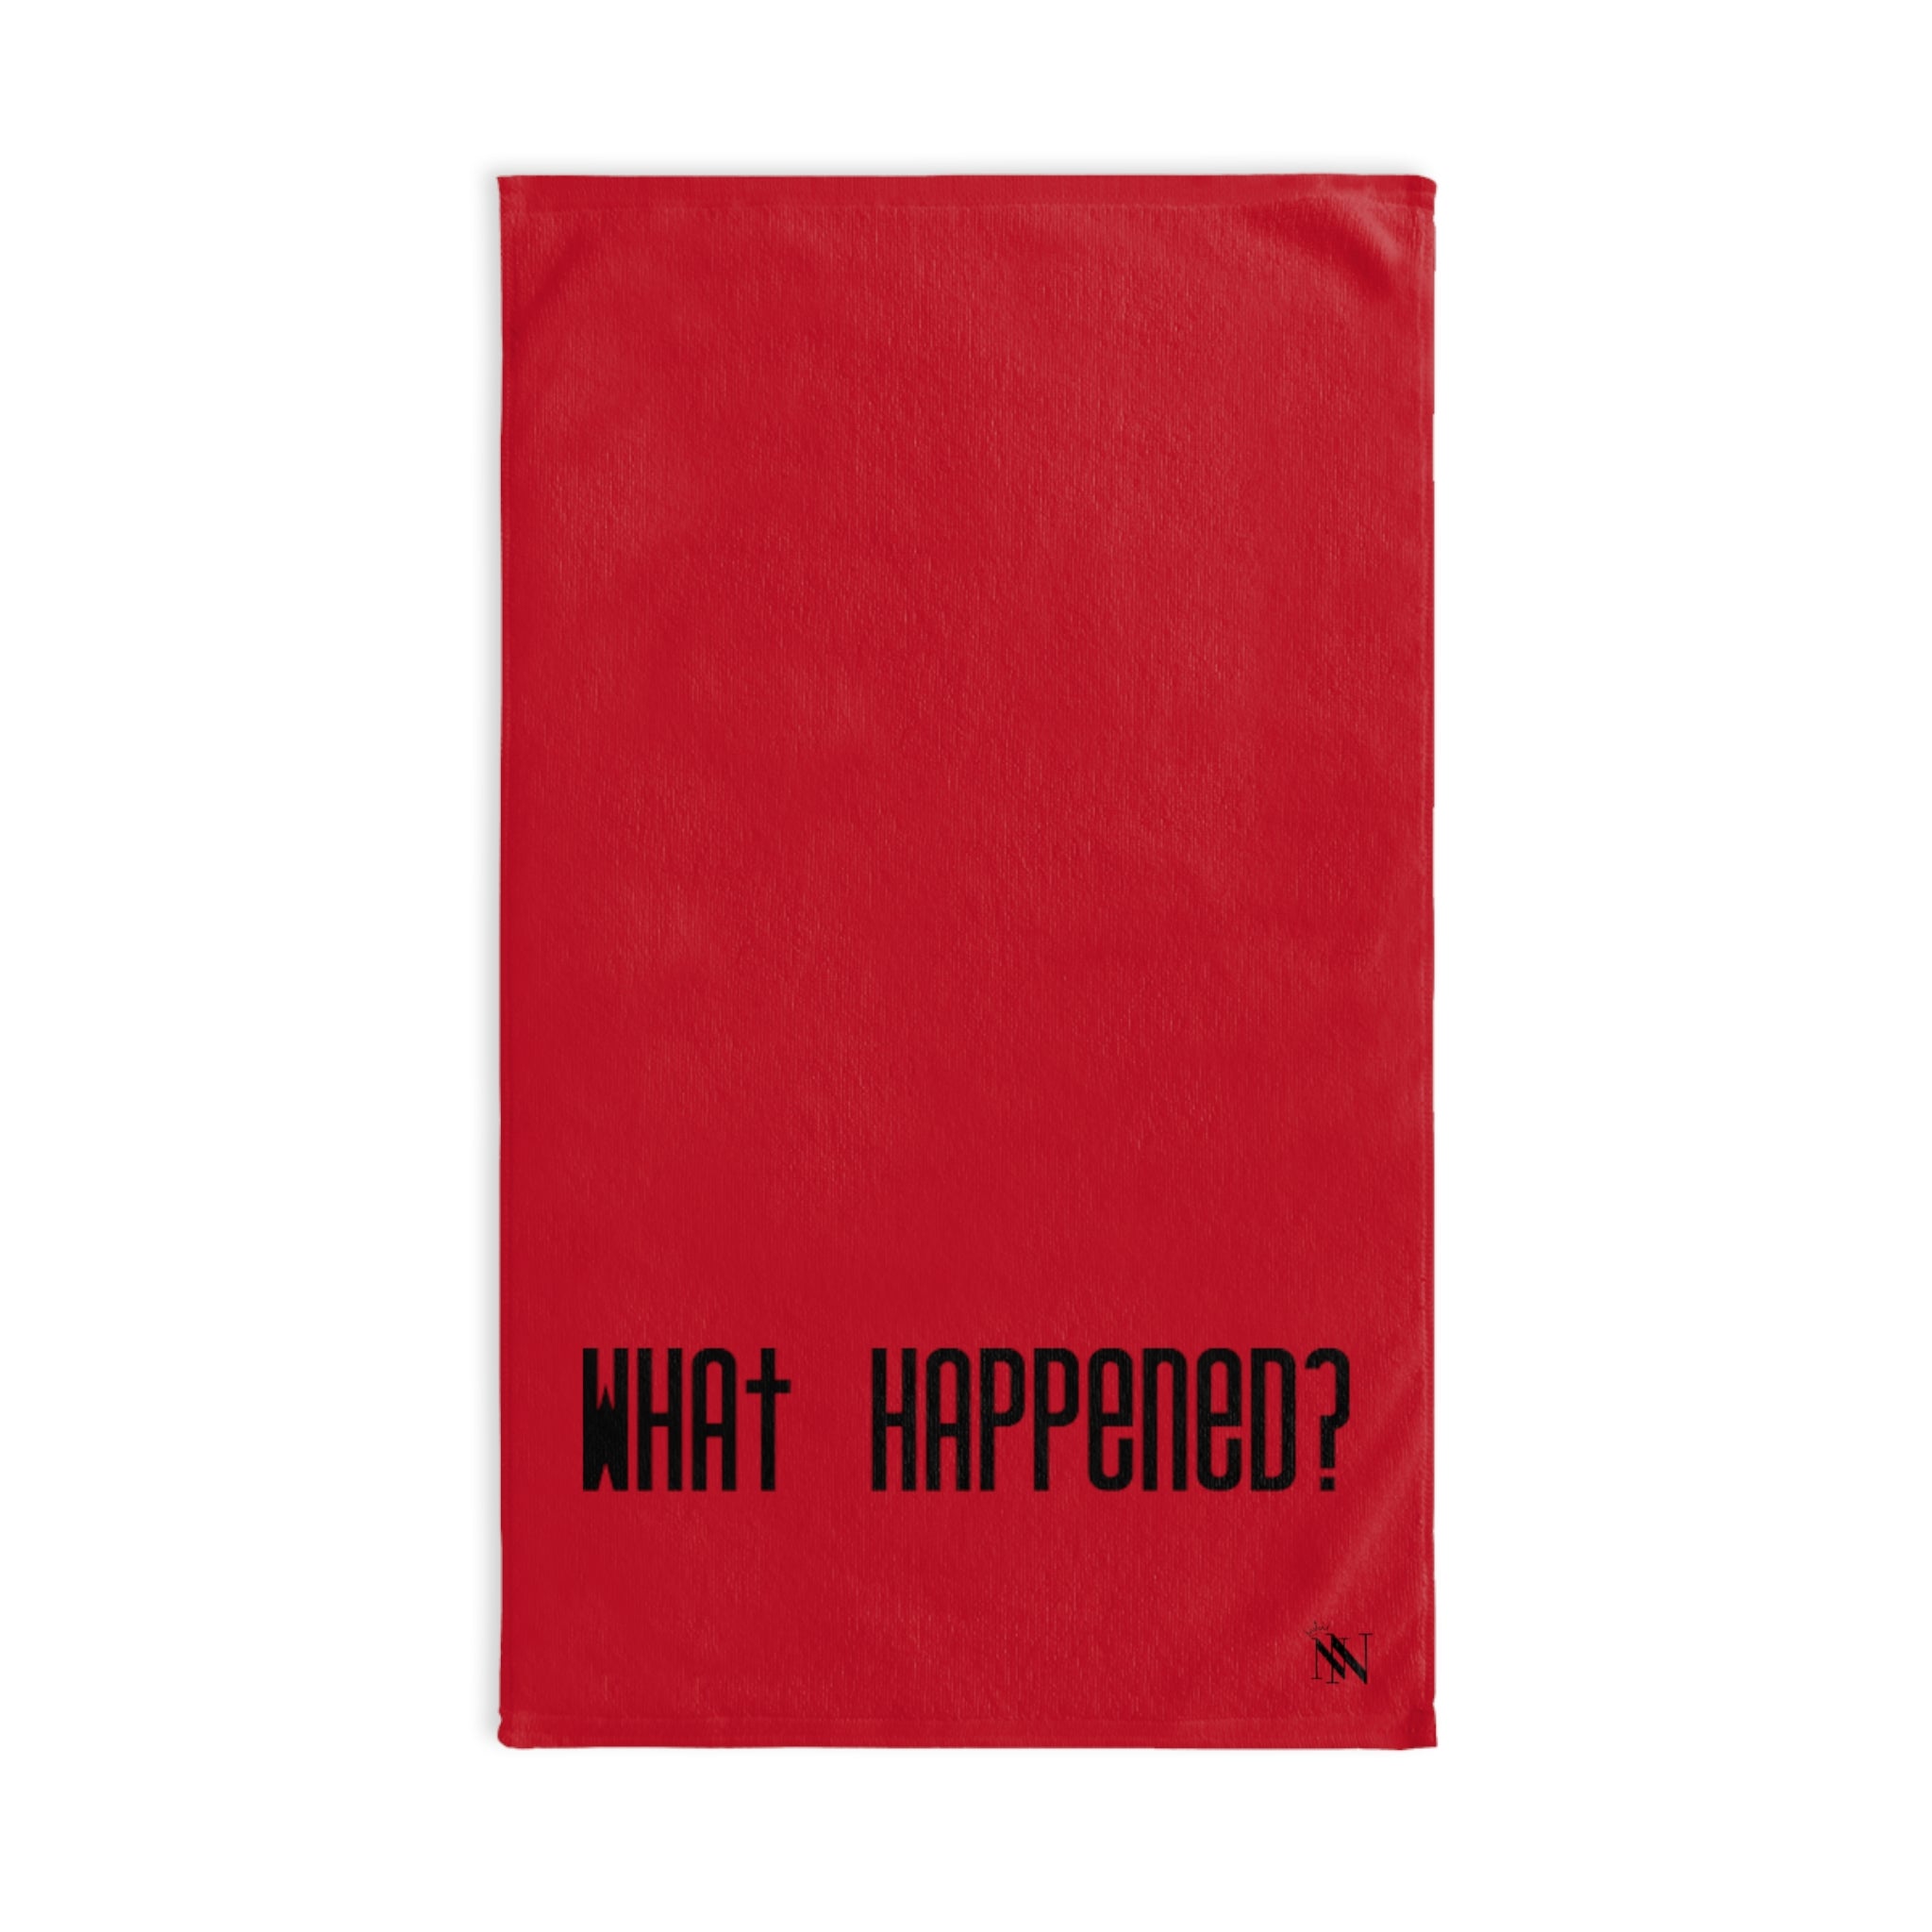 What Happened Red | Sexy Gifts for Boyfriend, Funny Towel Romantic Gift for Wedding Couple Fiance First Year 2nd Anniversary Valentines, Party Gag Gifts, Joke Humor Cloth for Husband Men BF NECTAR NAPKINS